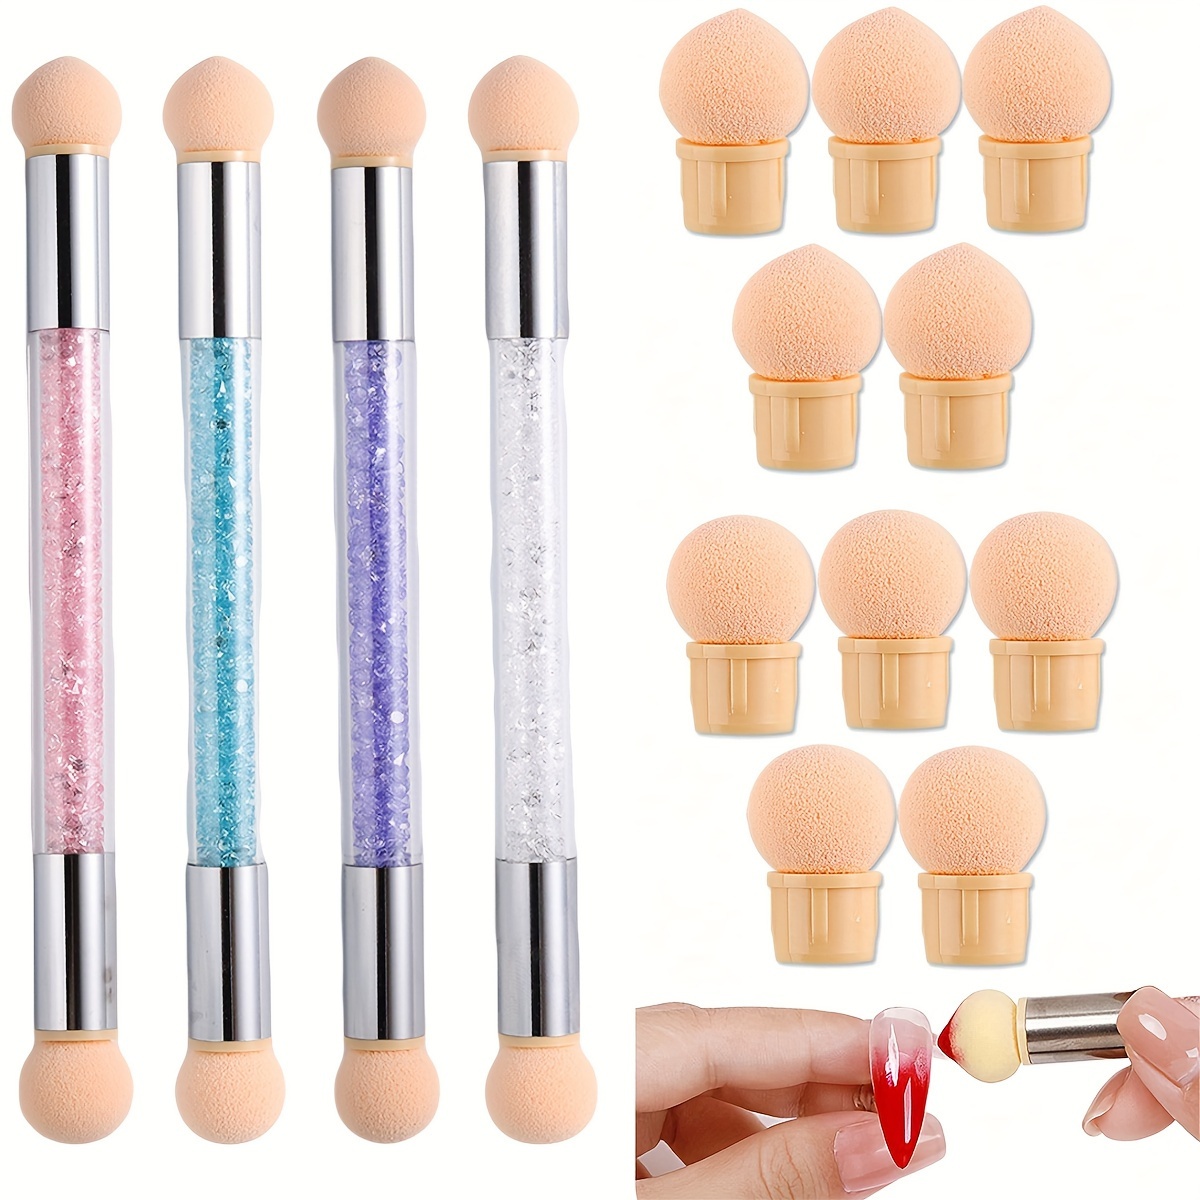 

Gradient Shading Nail Art Pens, Smudge Pen With Replacement Head, Double-ended Sponge Head Smudge Pen, Nail Art Brush, Nail Art Painting Tool